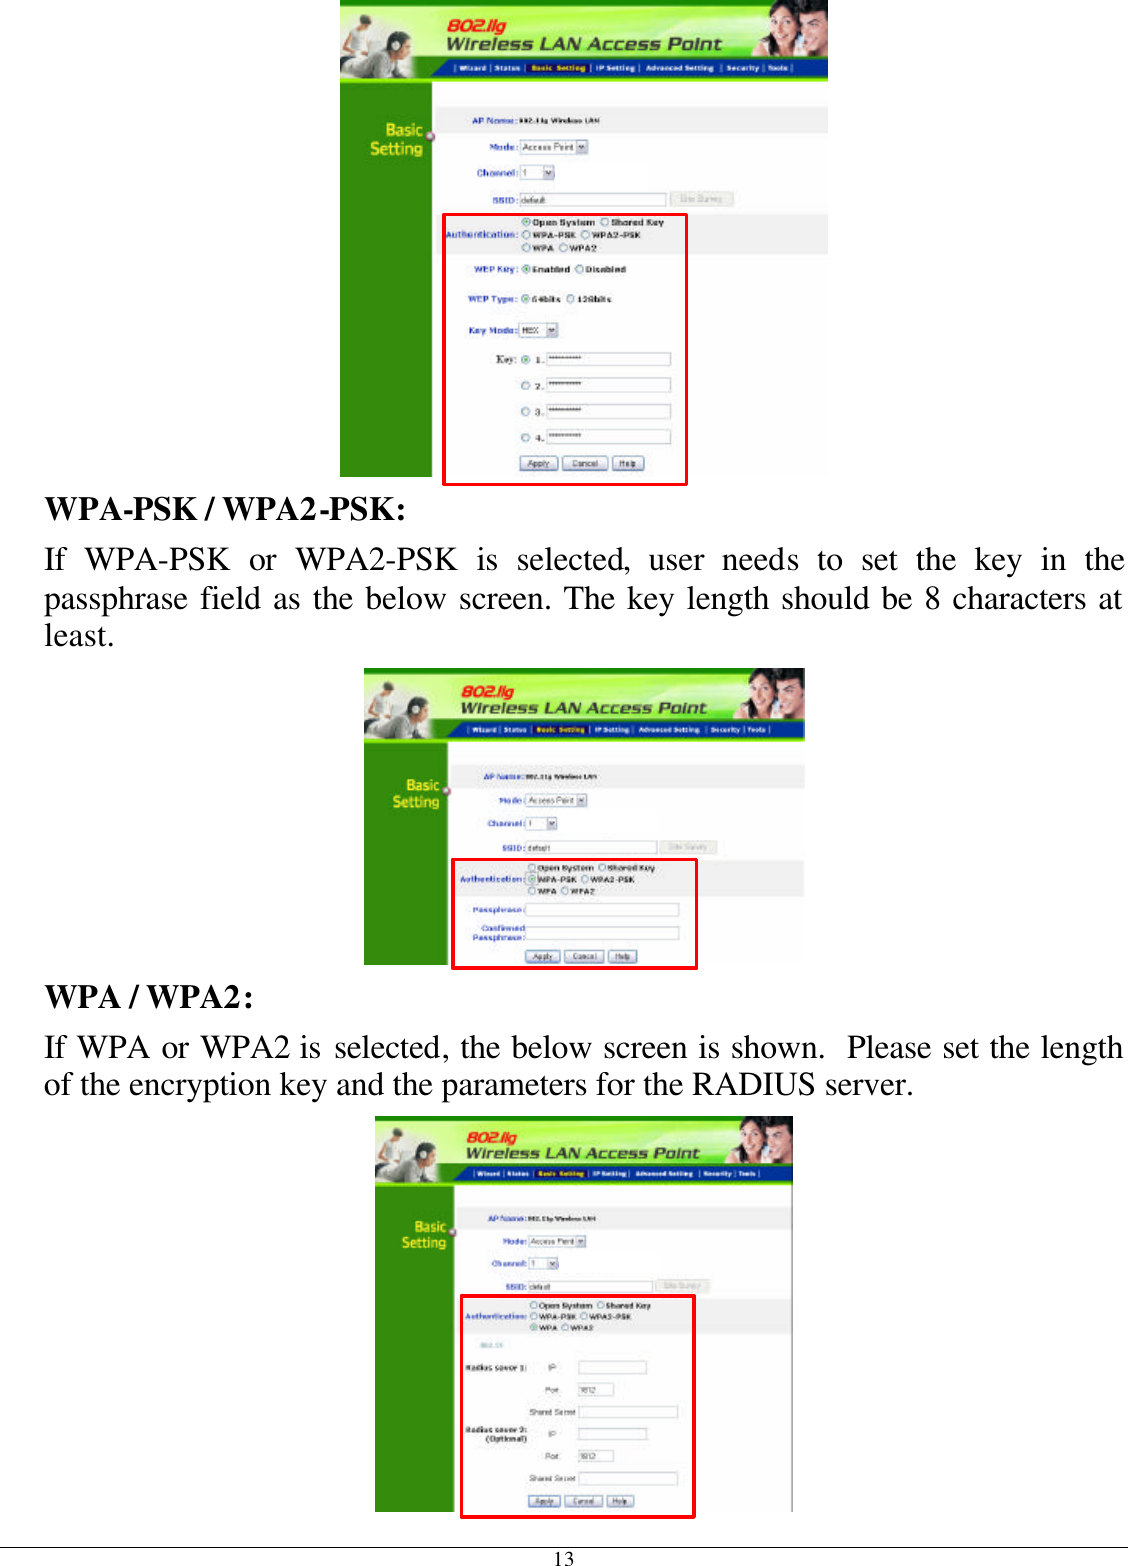 13  WPA-PSK / WPA2-PSK:    If WPA-PSK or WPA2-PSK is selected, user needs to set the key in the passphrase field as the below screen. The key length should be 8 characters at least.  WPA / WPA2:  If WPA or WPA2 is selected, the below screen is shown.  Please set the length of the encryption key and the parameters for the RADIUS server.  